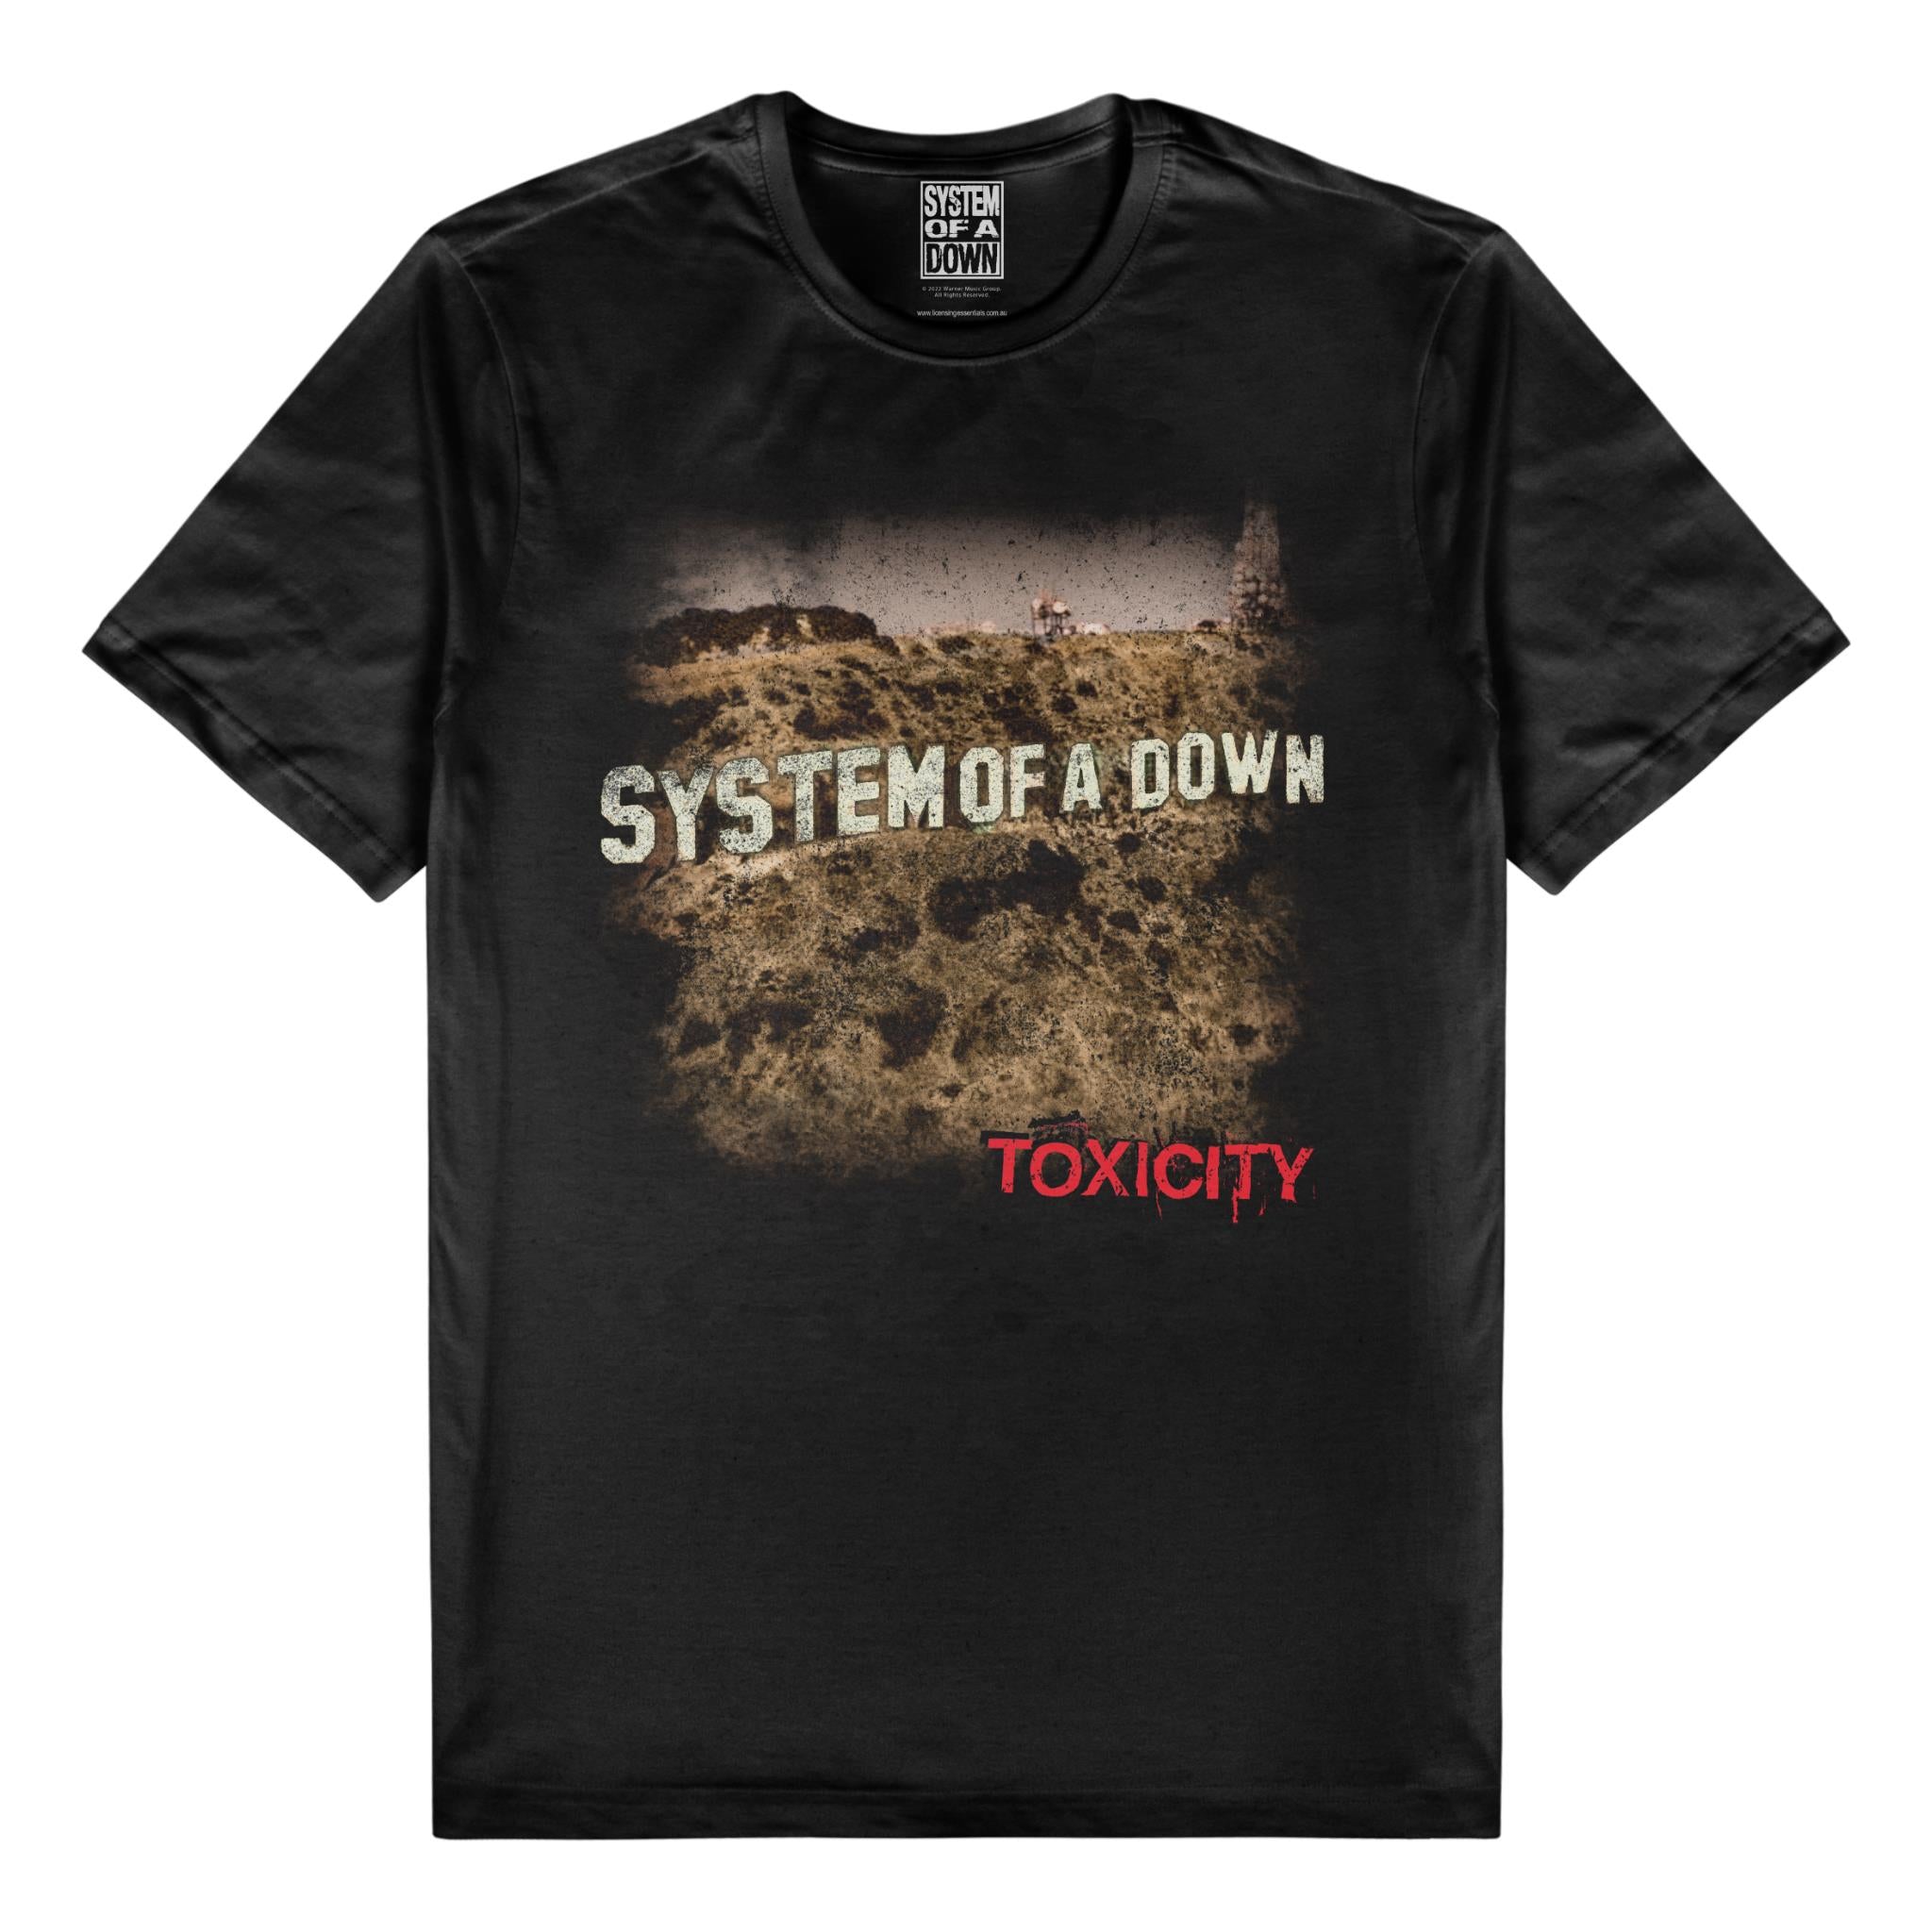 system of a down - t-shirt